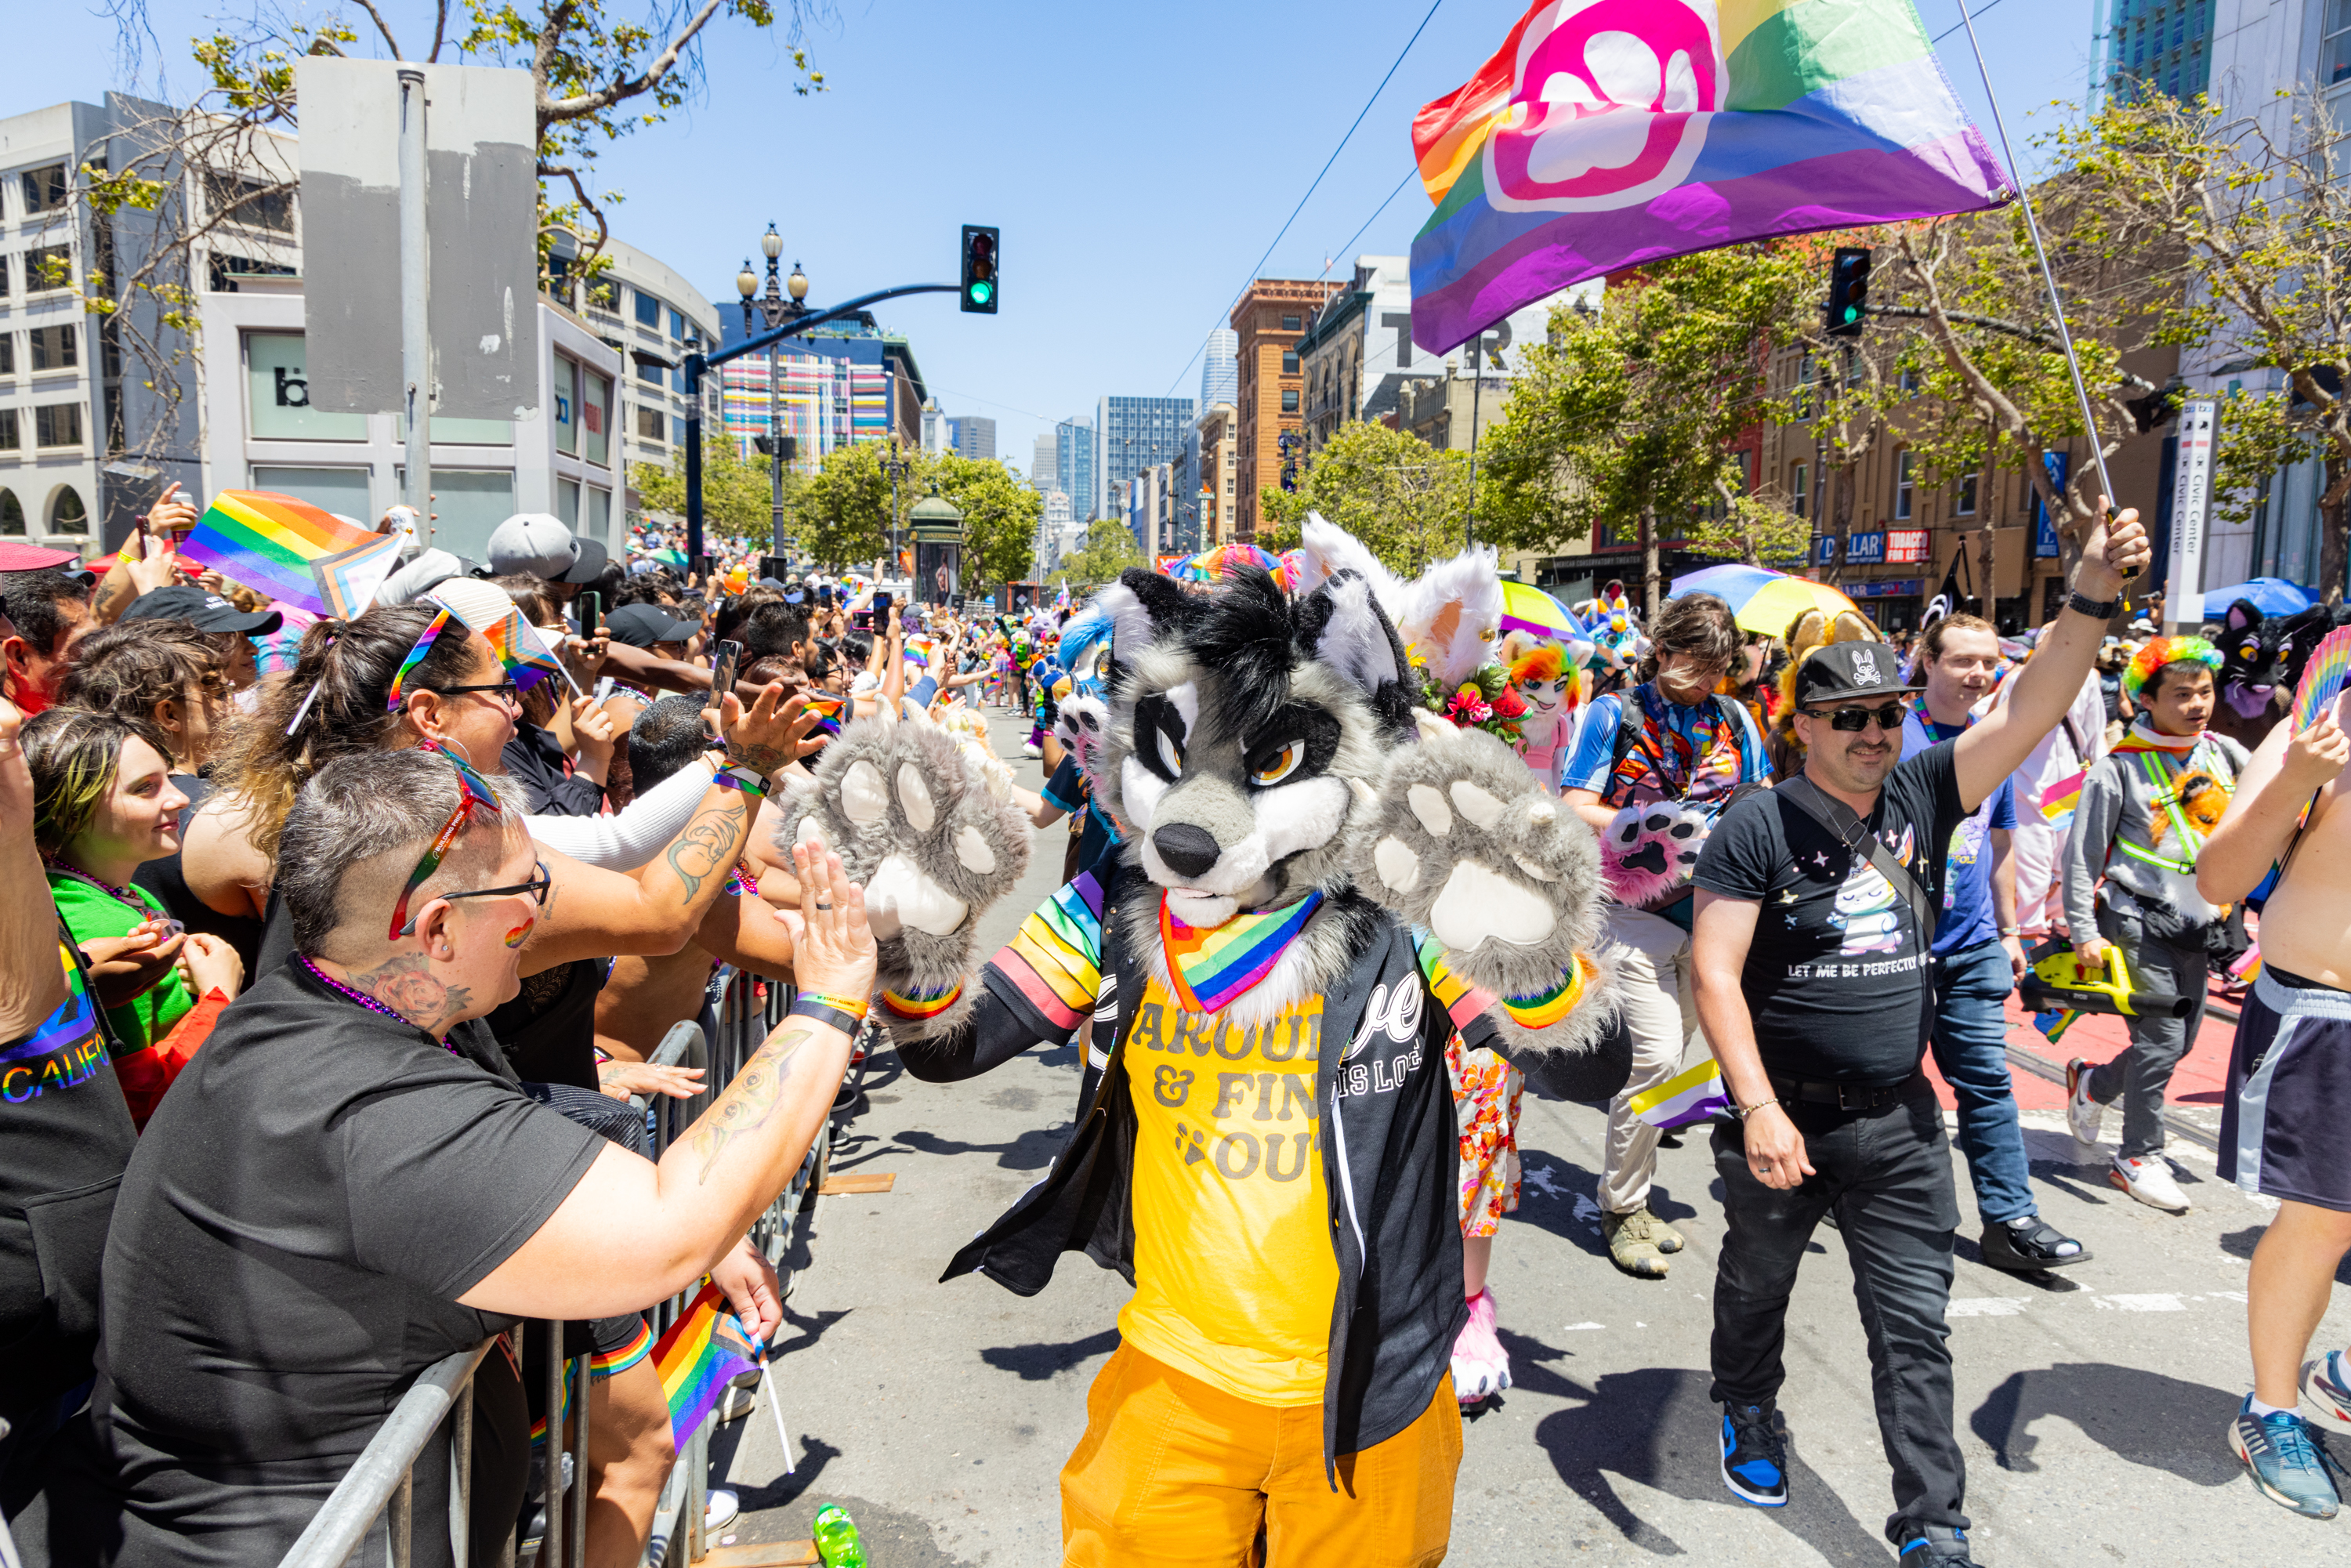 A colorful parade features a person in a wolf costume, surrounded by a joyful crowd waving rainbow flags, high-fiving attendees in a sunny urban setting.